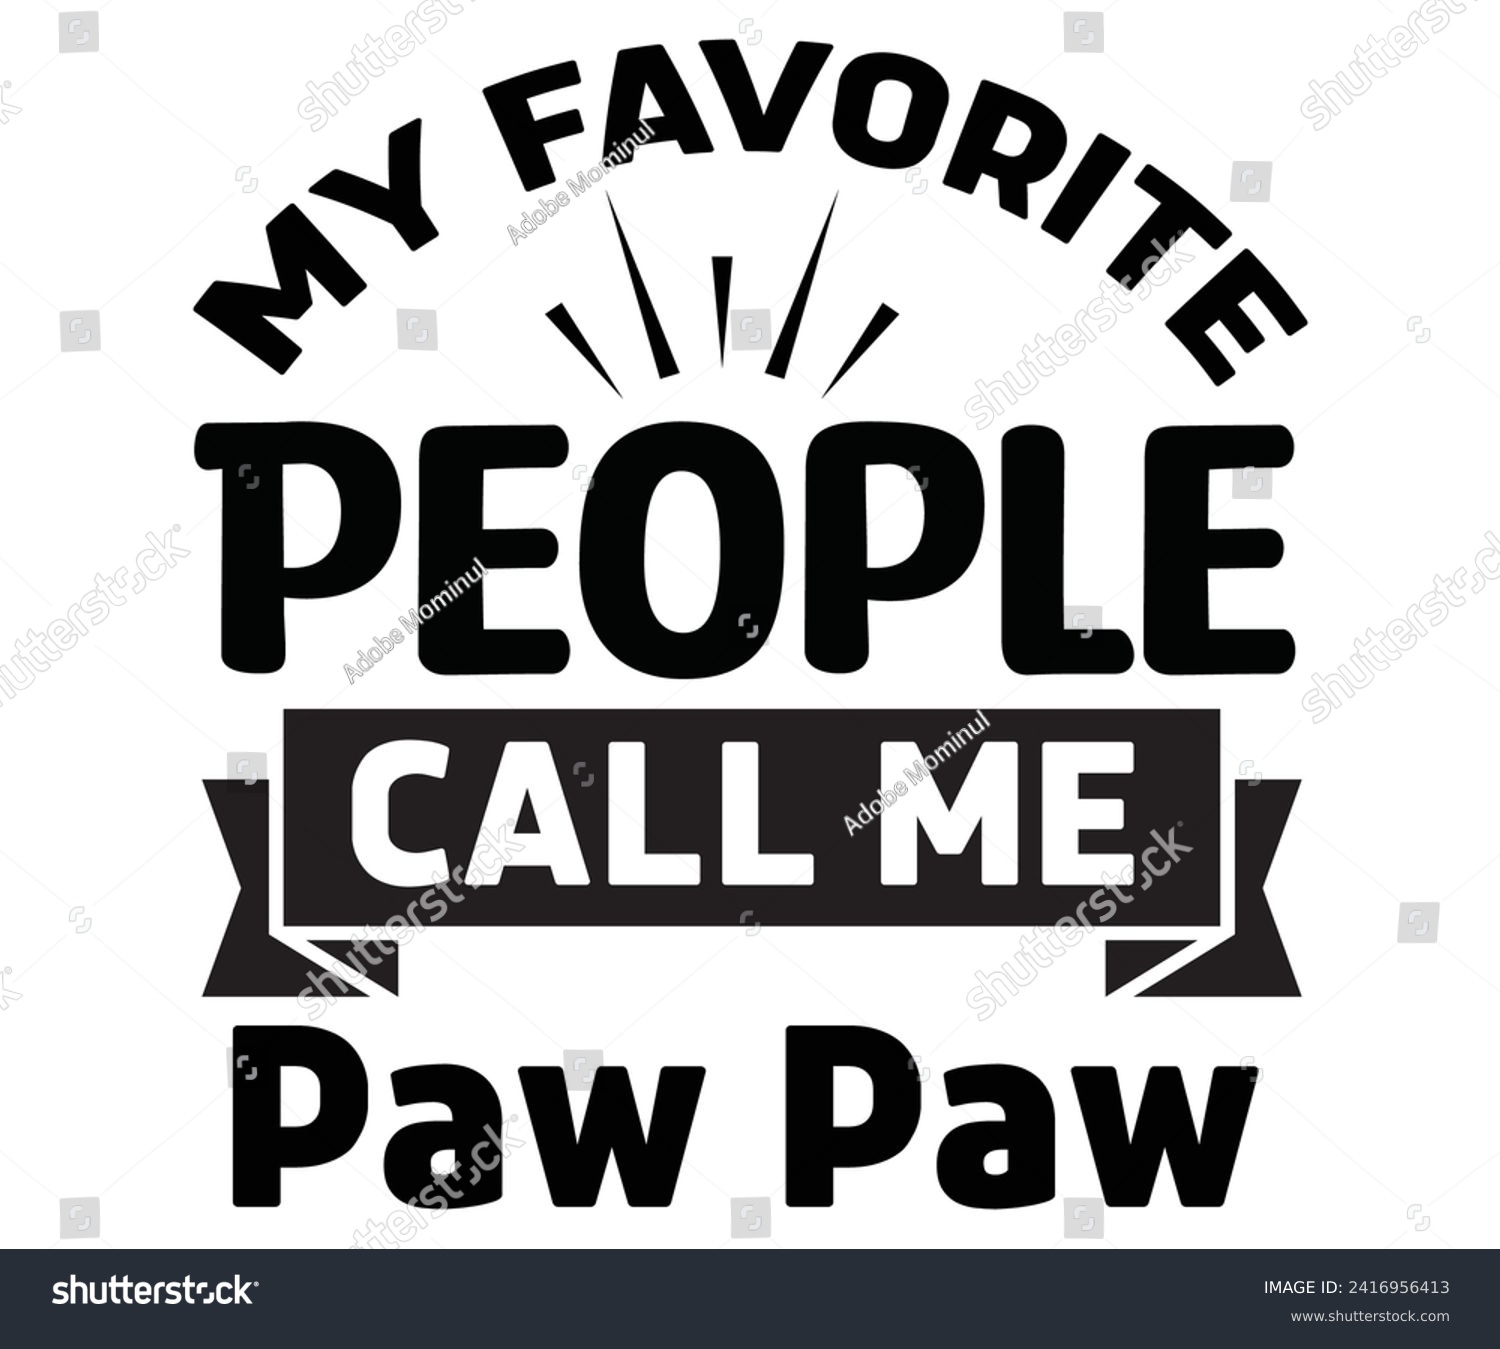 SVG of My Favorite People Call Me Paw Paw,Father's Day Svg,Papa svg,Grandpa Svg,Father's Day Saying Qoutes,Dad Svg,Funny Father, Gift For Dad Svg,Daddy Svg,Family Svg,T shirt Design,Svg Cut File,Typography svg